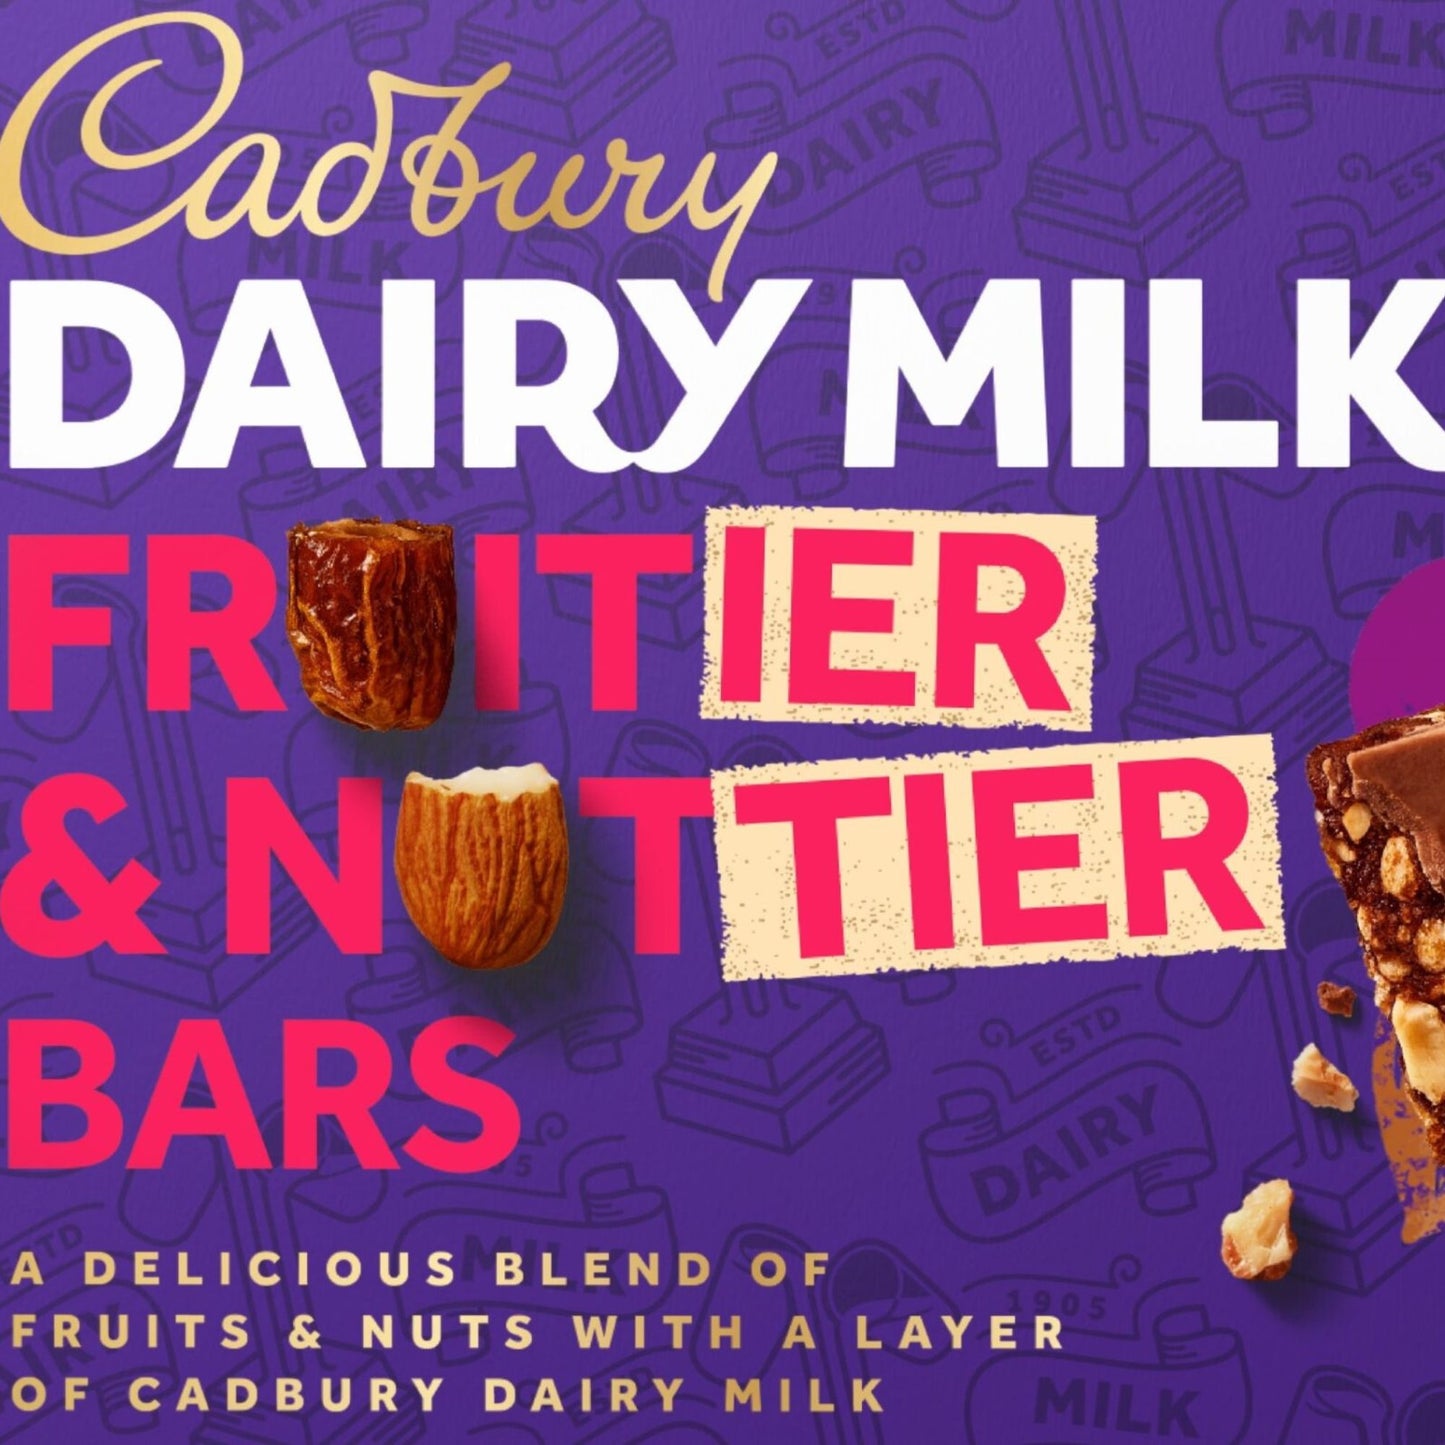 2, 3, or 5 Cadbury Dairy Milk Chocolates with flavors of your choice